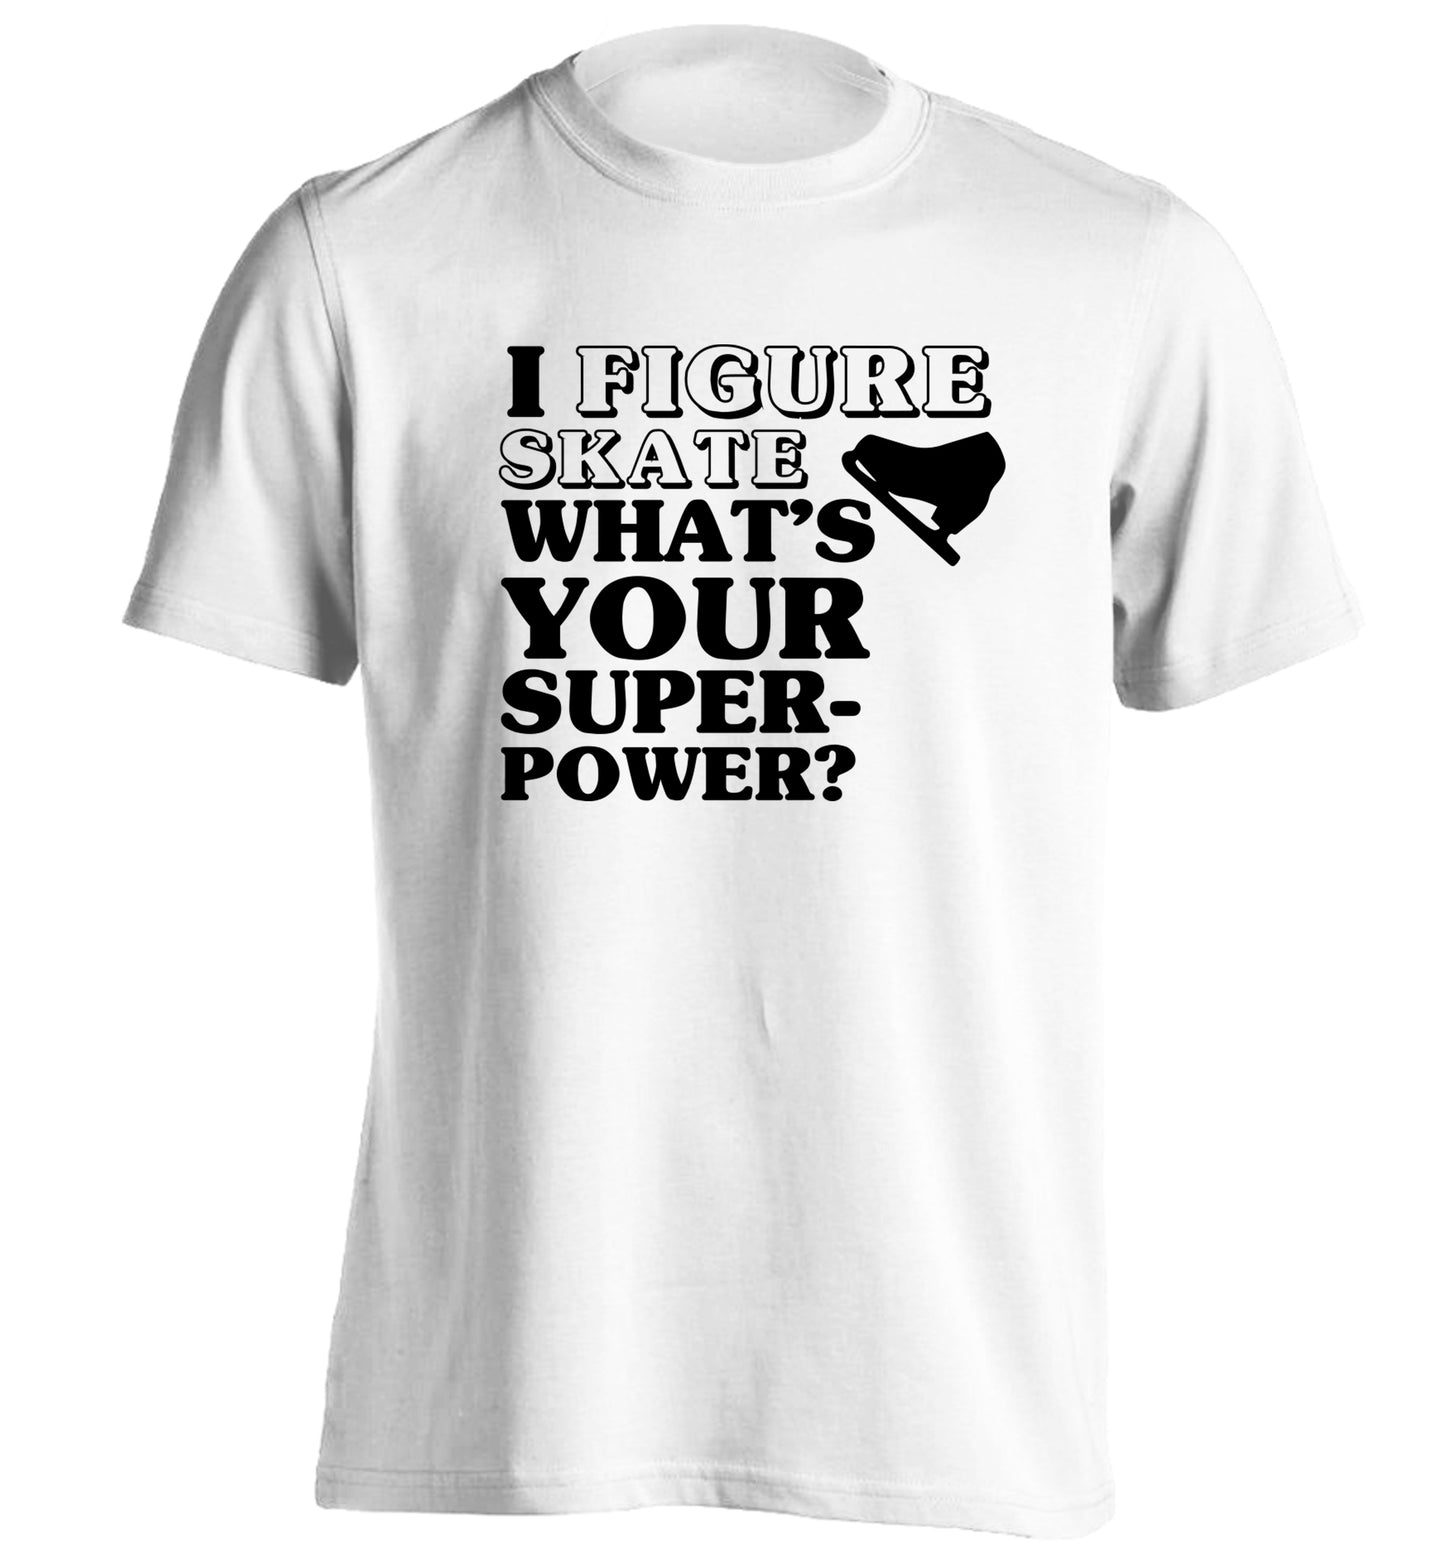 I figure skate what's your superpower? adults unisexwhite Tshirt 2XL